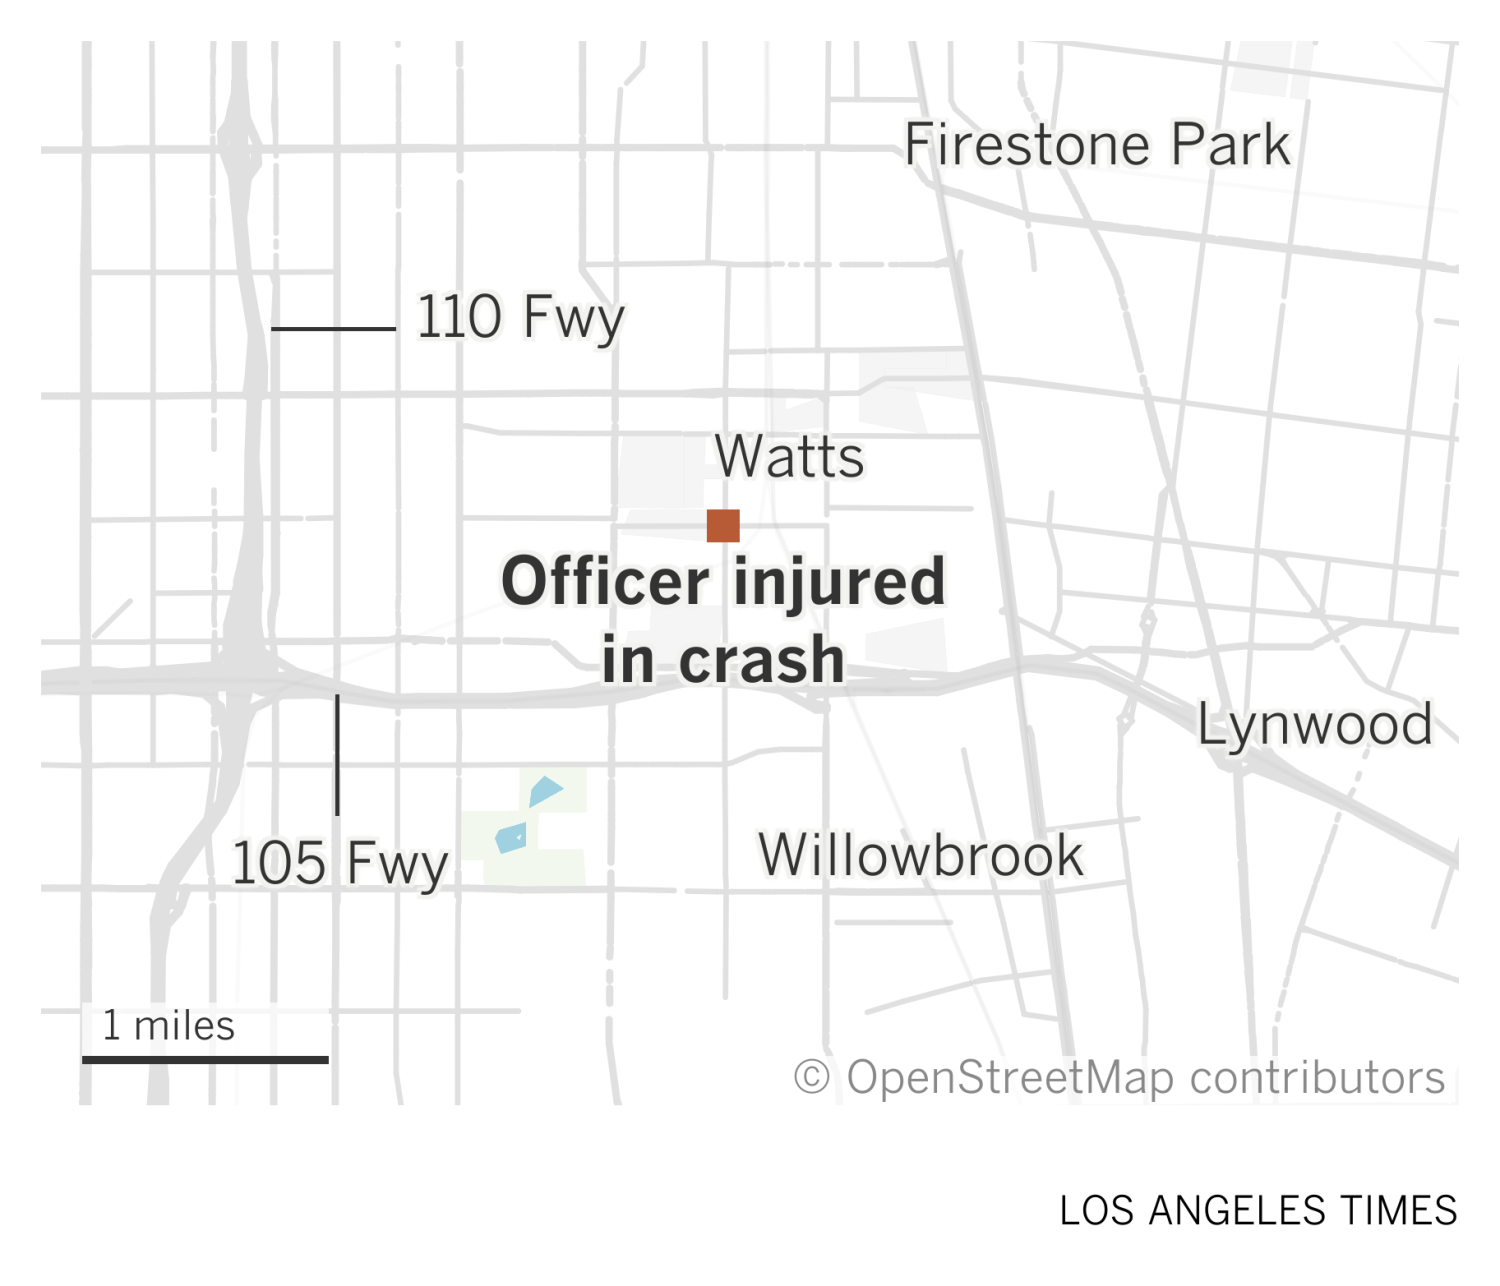 ?url=https%3A%2F%2Fcalifornia times brightspot.s3.amazonaws.com%2F75%2Fd6%2F405911354867bbf5542e2b4c2286%2Fiyxri officer injured in crash in watts News For Everyone Zoohouse News